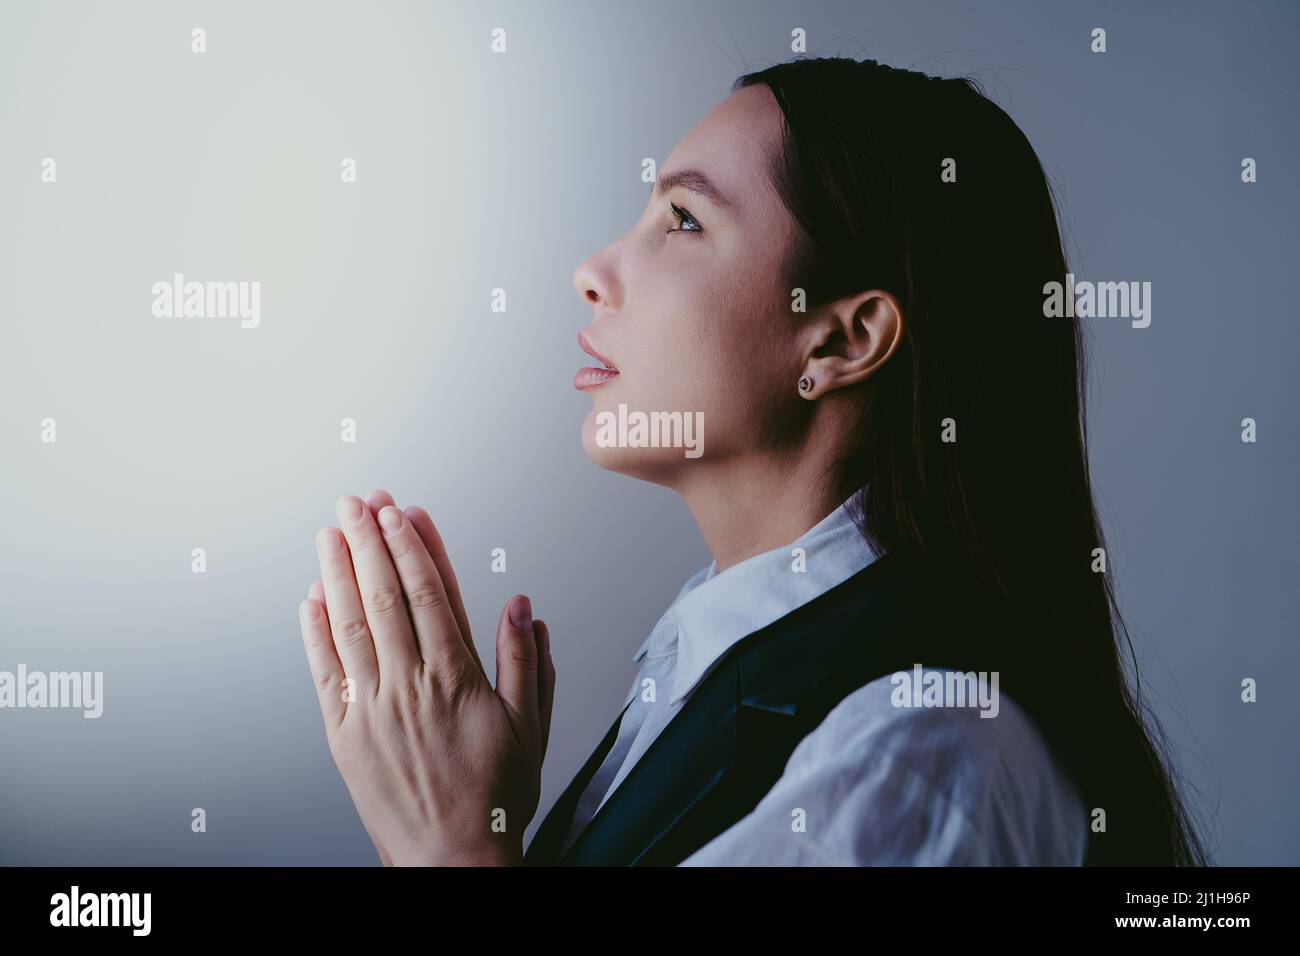 Young brunette girl pray to god, close up portrait. Woman folds her hands in prayer. Faith and hope concept. Stock Photo